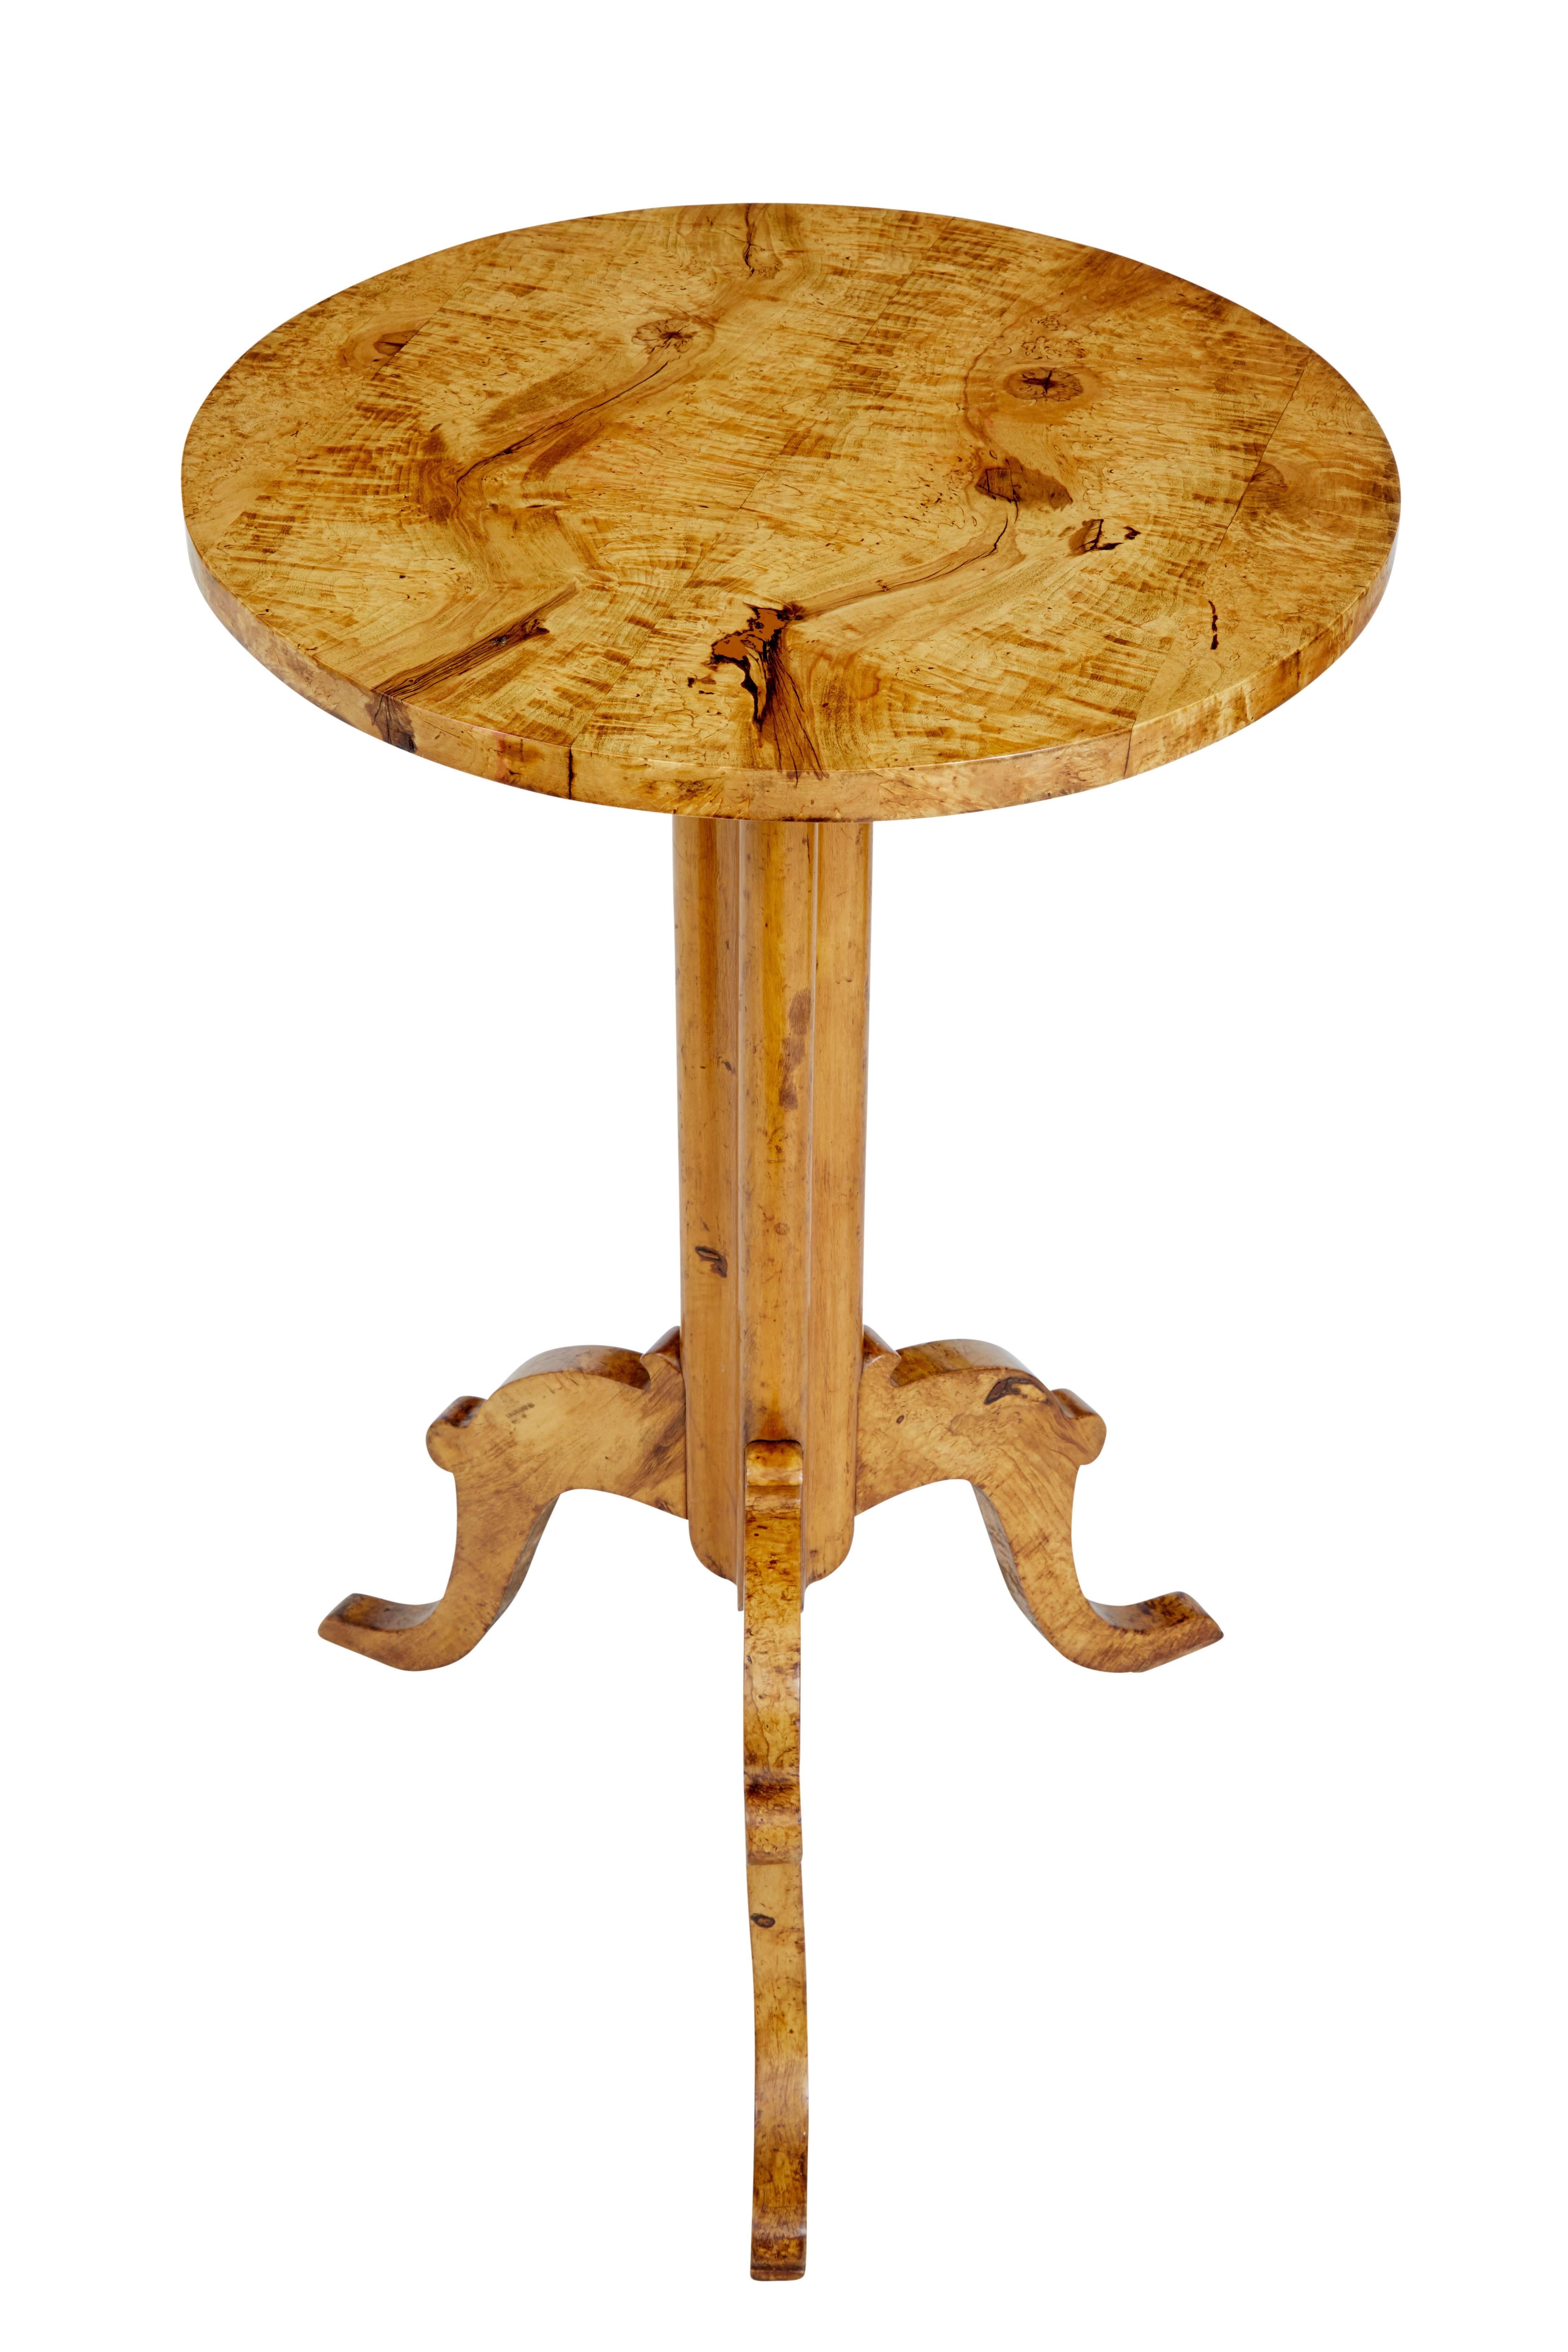 Good quality Swedish birch root table, circa 1860.

Solid burr birch circular top, standing on shaped stem and scrolled legs.

Rich golden color.

Area of restoration to the top were a wood knot was, but this has been done sympathetically.